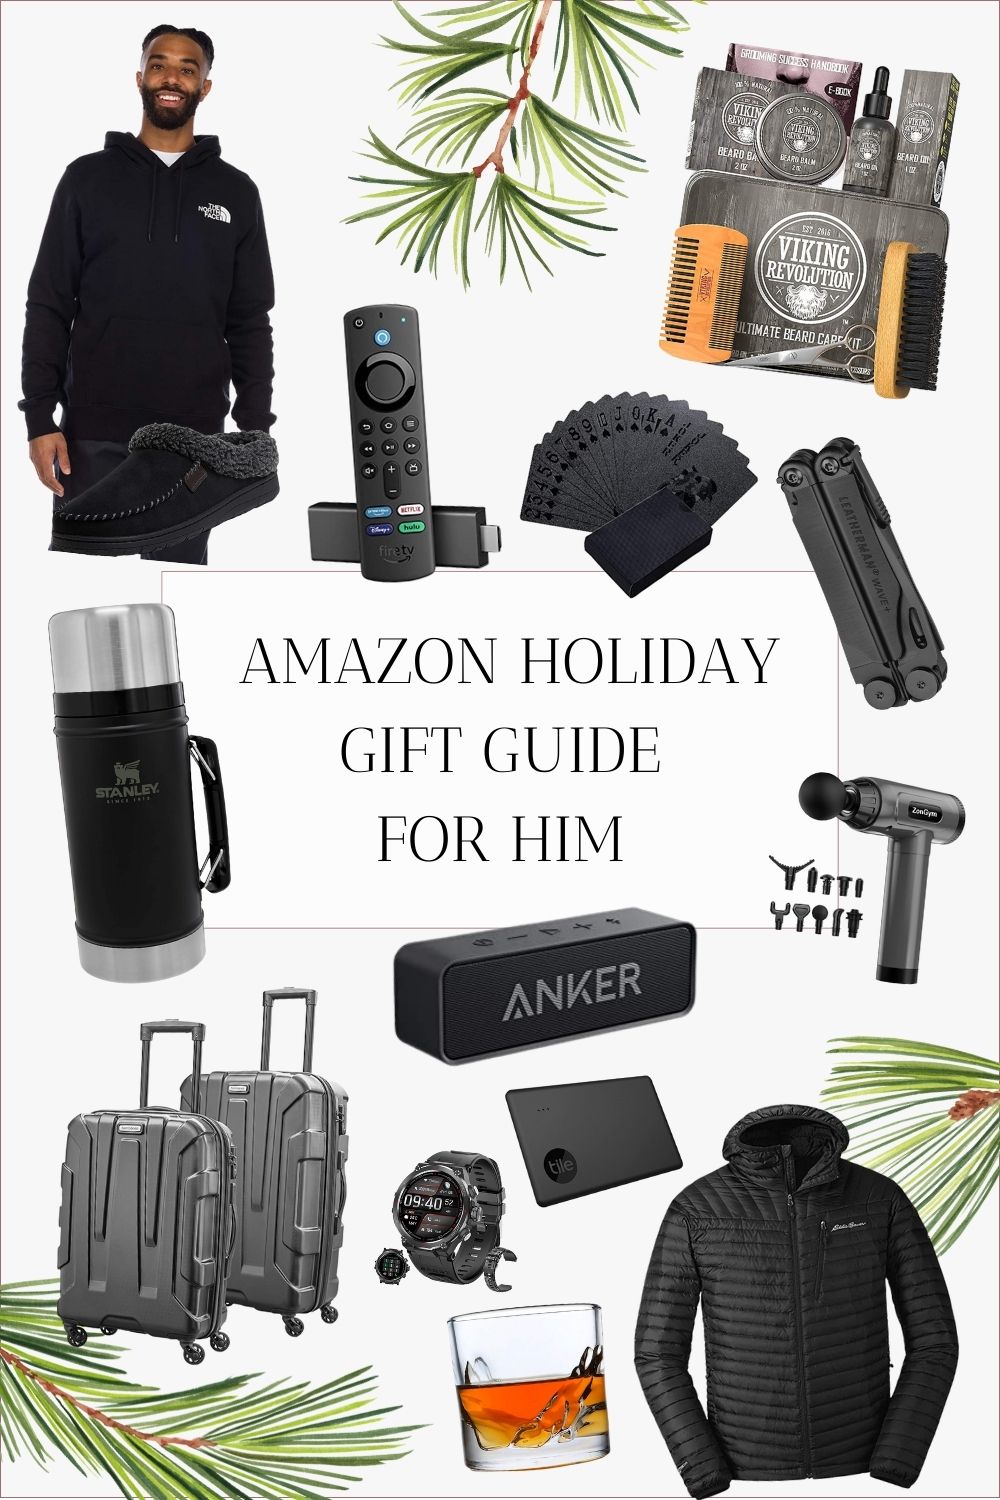 Top Amazon gifts for men. Links for our favorite best men's gifts for Christmas 2022. We've built a huge list of our top gifts from Amazon for boyfriends, husbands, grandpas and brothers for the holiday season.